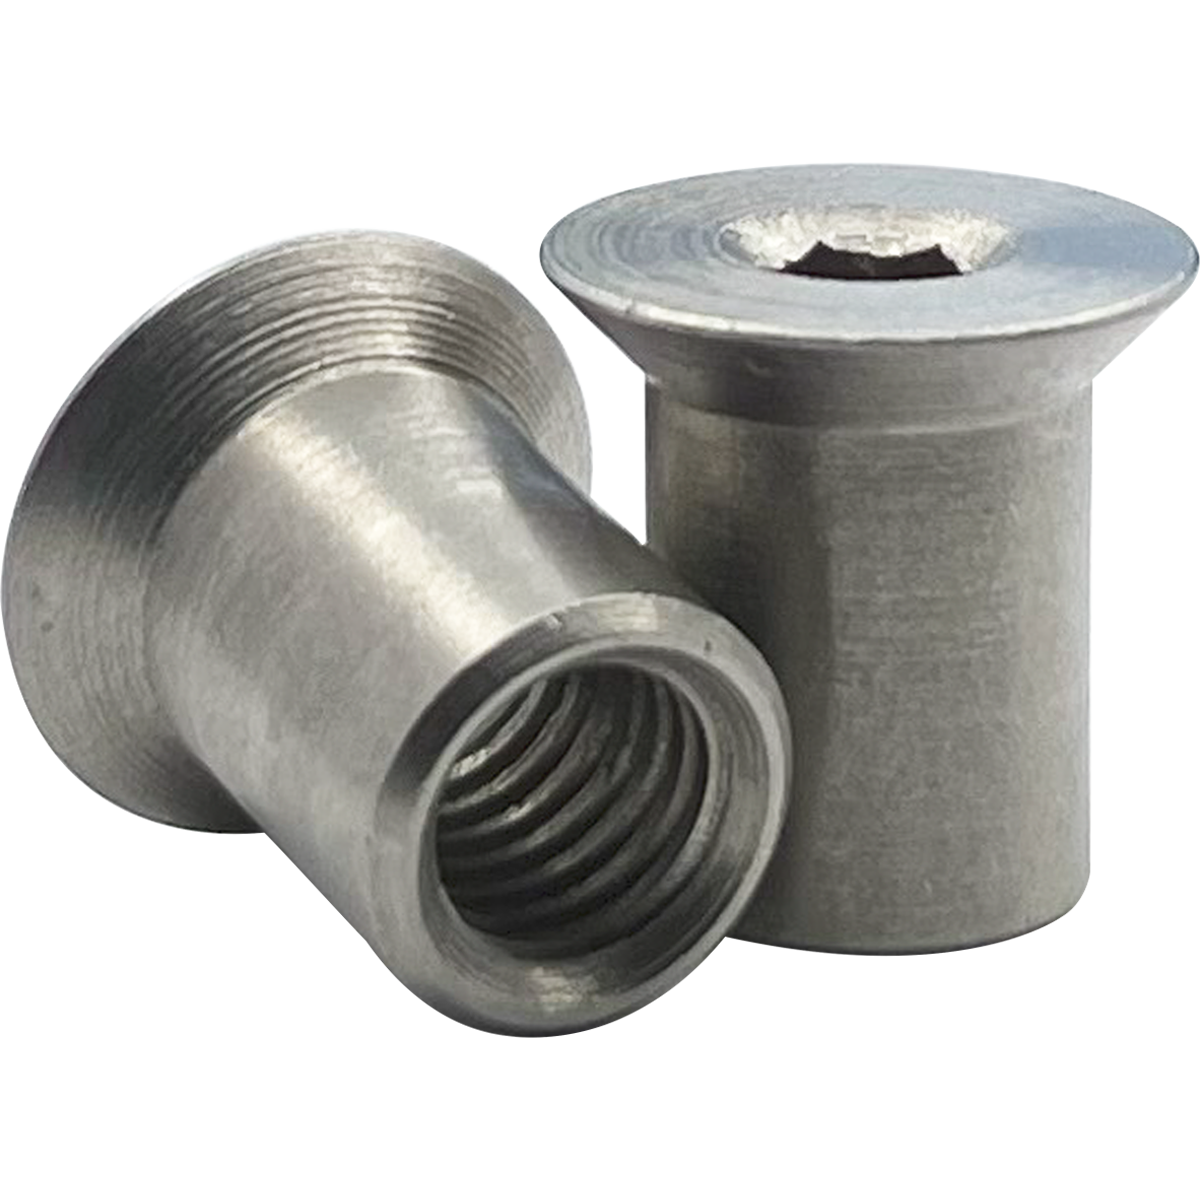 A1 stainless steel, socket, countersunk barrel nuts